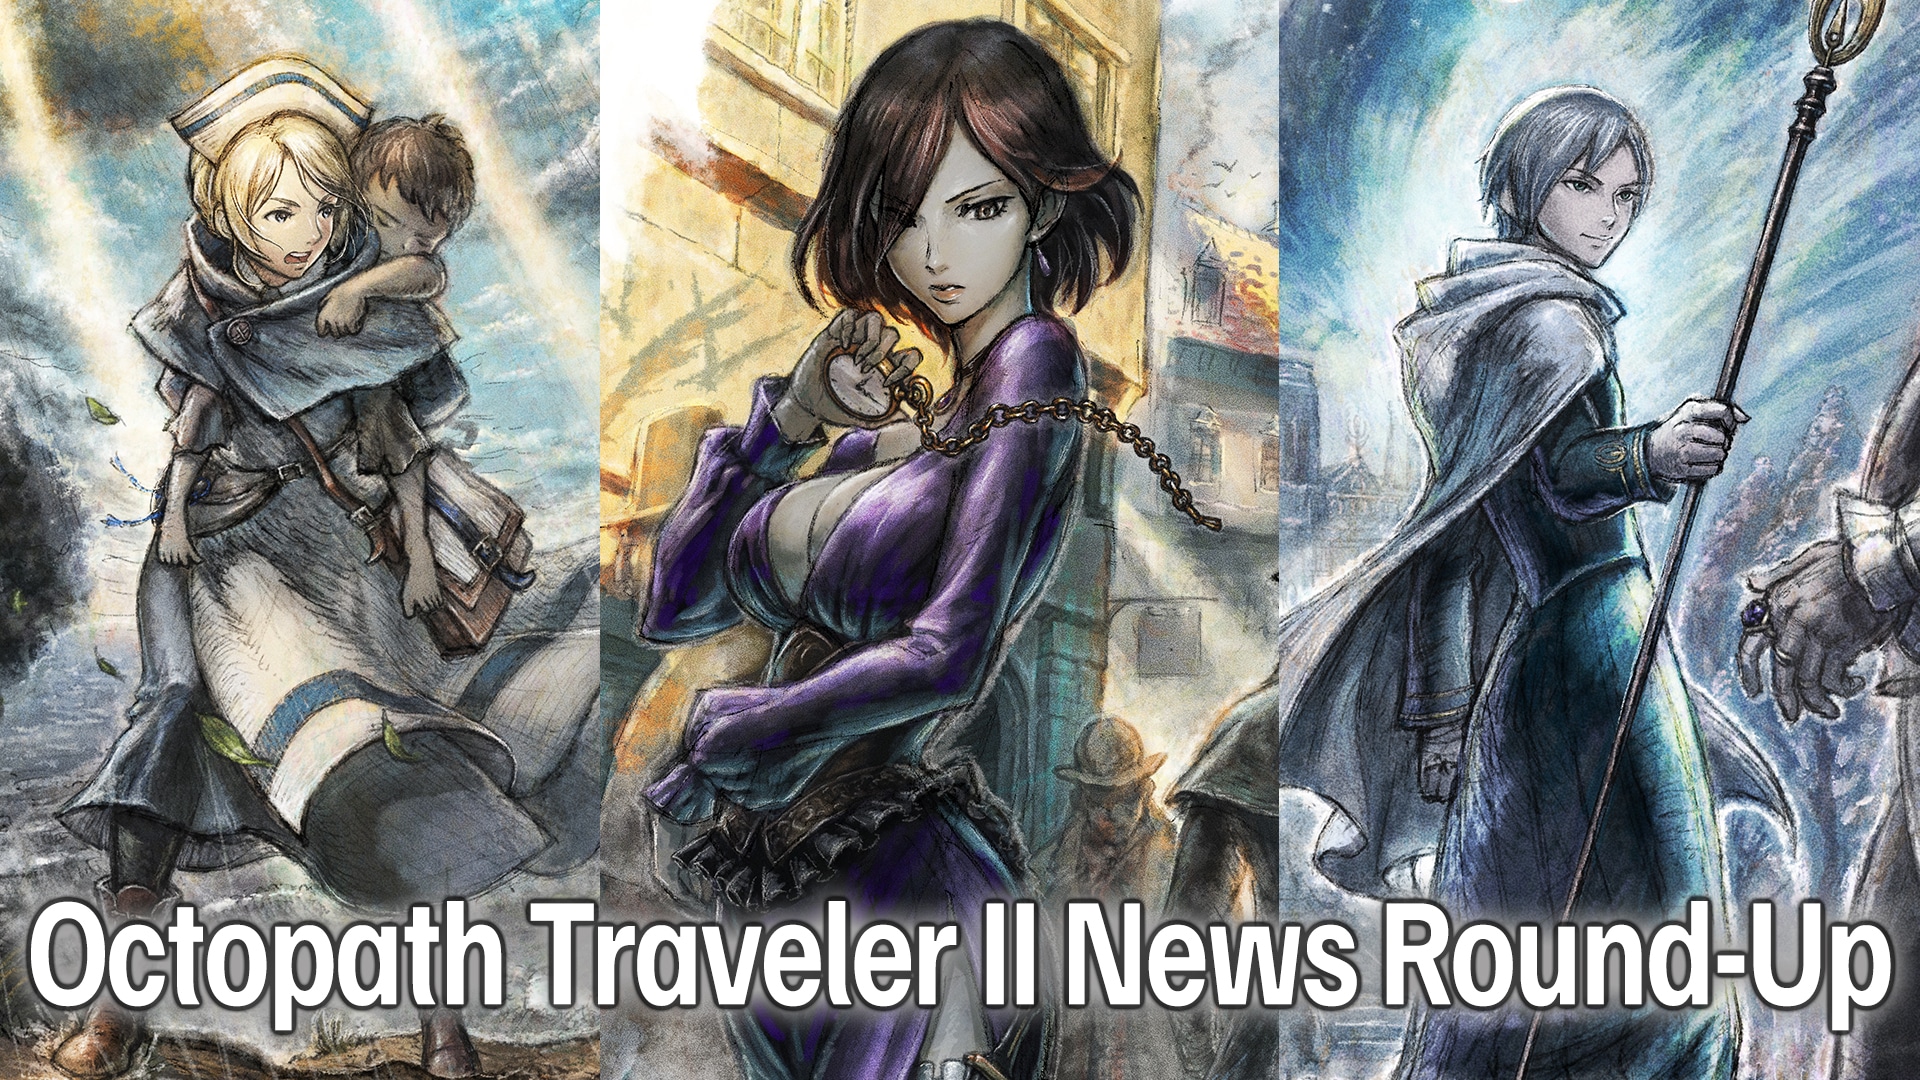 Octopath Traveler II News Round-Up; All Character Stories, Screenshots, Gameplay Details & More